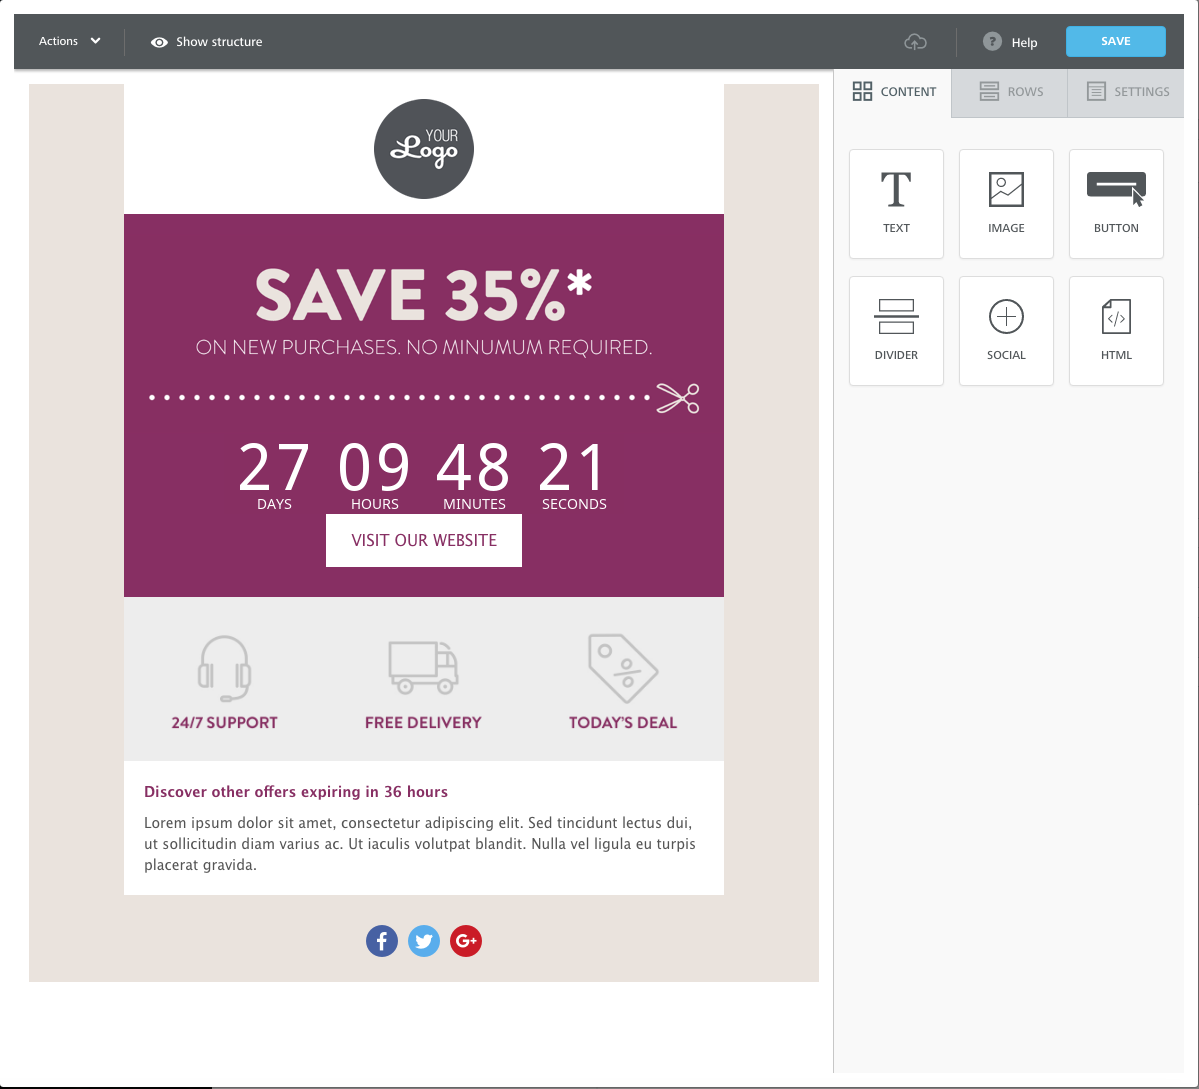 Email Countdown Timer